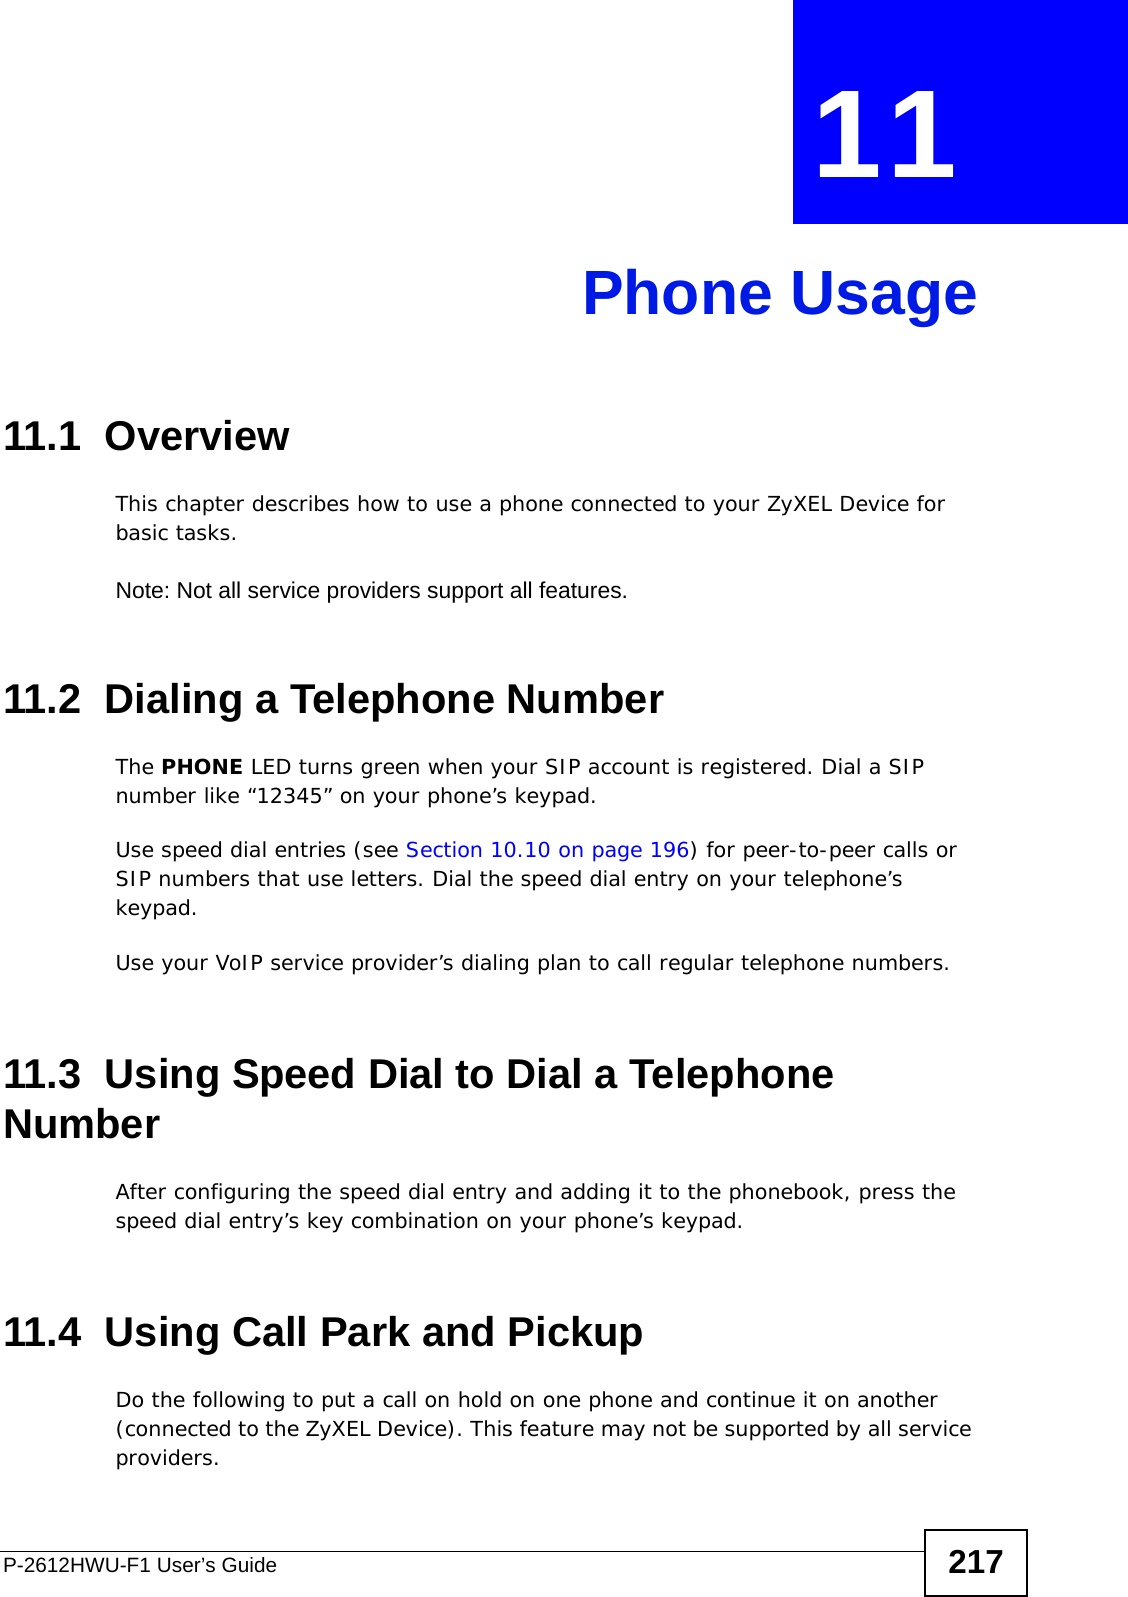 P-2612HWU-F1 User’s Guide 217CHAPTER  11 Phone Usage11.1  OverviewThis chapter describes how to use a phone connected to your ZyXEL Device for basic tasks.Note: Not all service providers support all features.11.2  Dialing a Telephone NumberThe PHONE LED turns green when your SIP account is registered. Dial a SIP number like “12345” on your phone’s keypad. Use speed dial entries (see Section 10.10 on page 196) for peer-to-peer calls or SIP numbers that use letters. Dial the speed dial entry on your telephone’s keypad. Use your VoIP service provider’s dialing plan to call regular telephone numbers.11.3  Using Speed Dial to Dial a Telephone NumberAfter configuring the speed dial entry and adding it to the phonebook, press the speed dial entry’s key combination on your phone’s keypad.11.4  Using Call Park and PickupDo the following to put a call on hold on one phone and continue it on another (connected to the ZyXEL Device). This feature may not be supported by all service providers. 